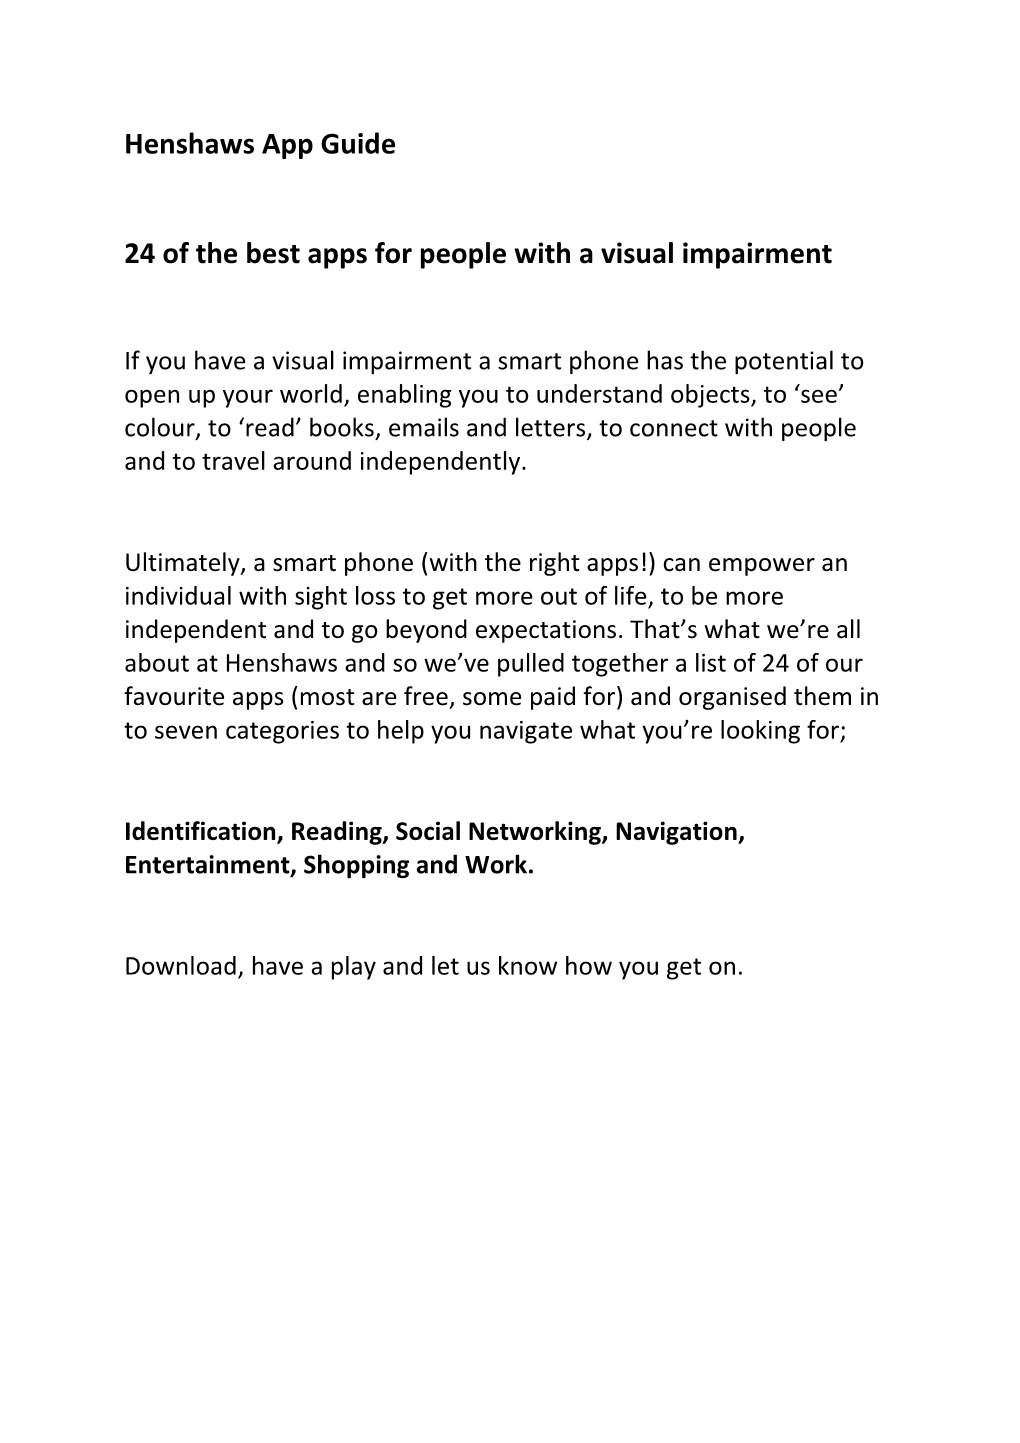 24 of the Best Apps for People with a Visual Impairment